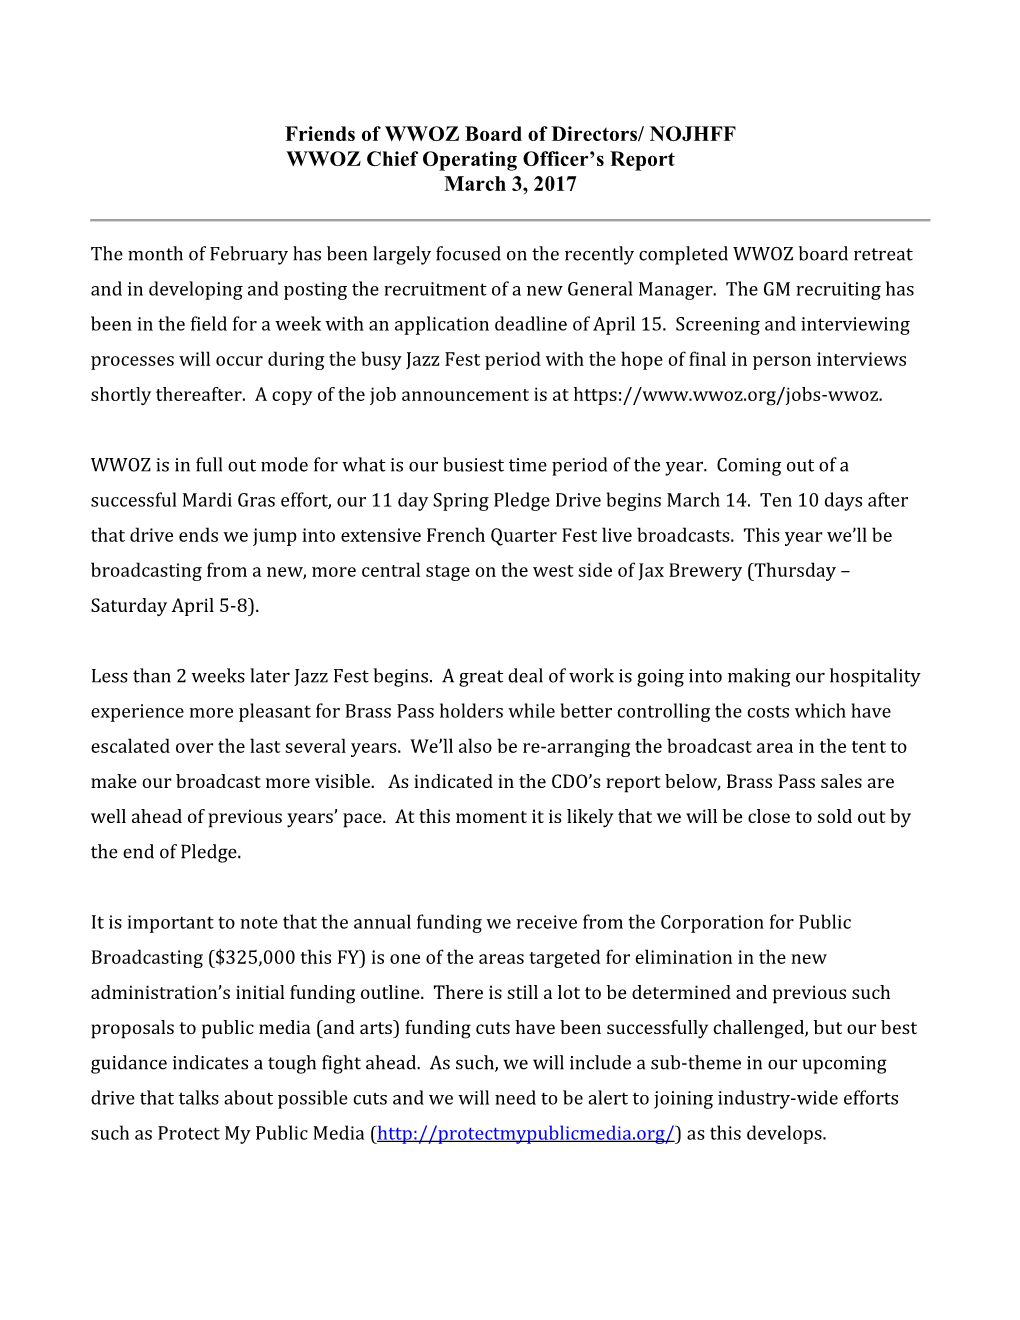 NOJHFF WWOZ Chief Operating Officer's Report March 3, 2017